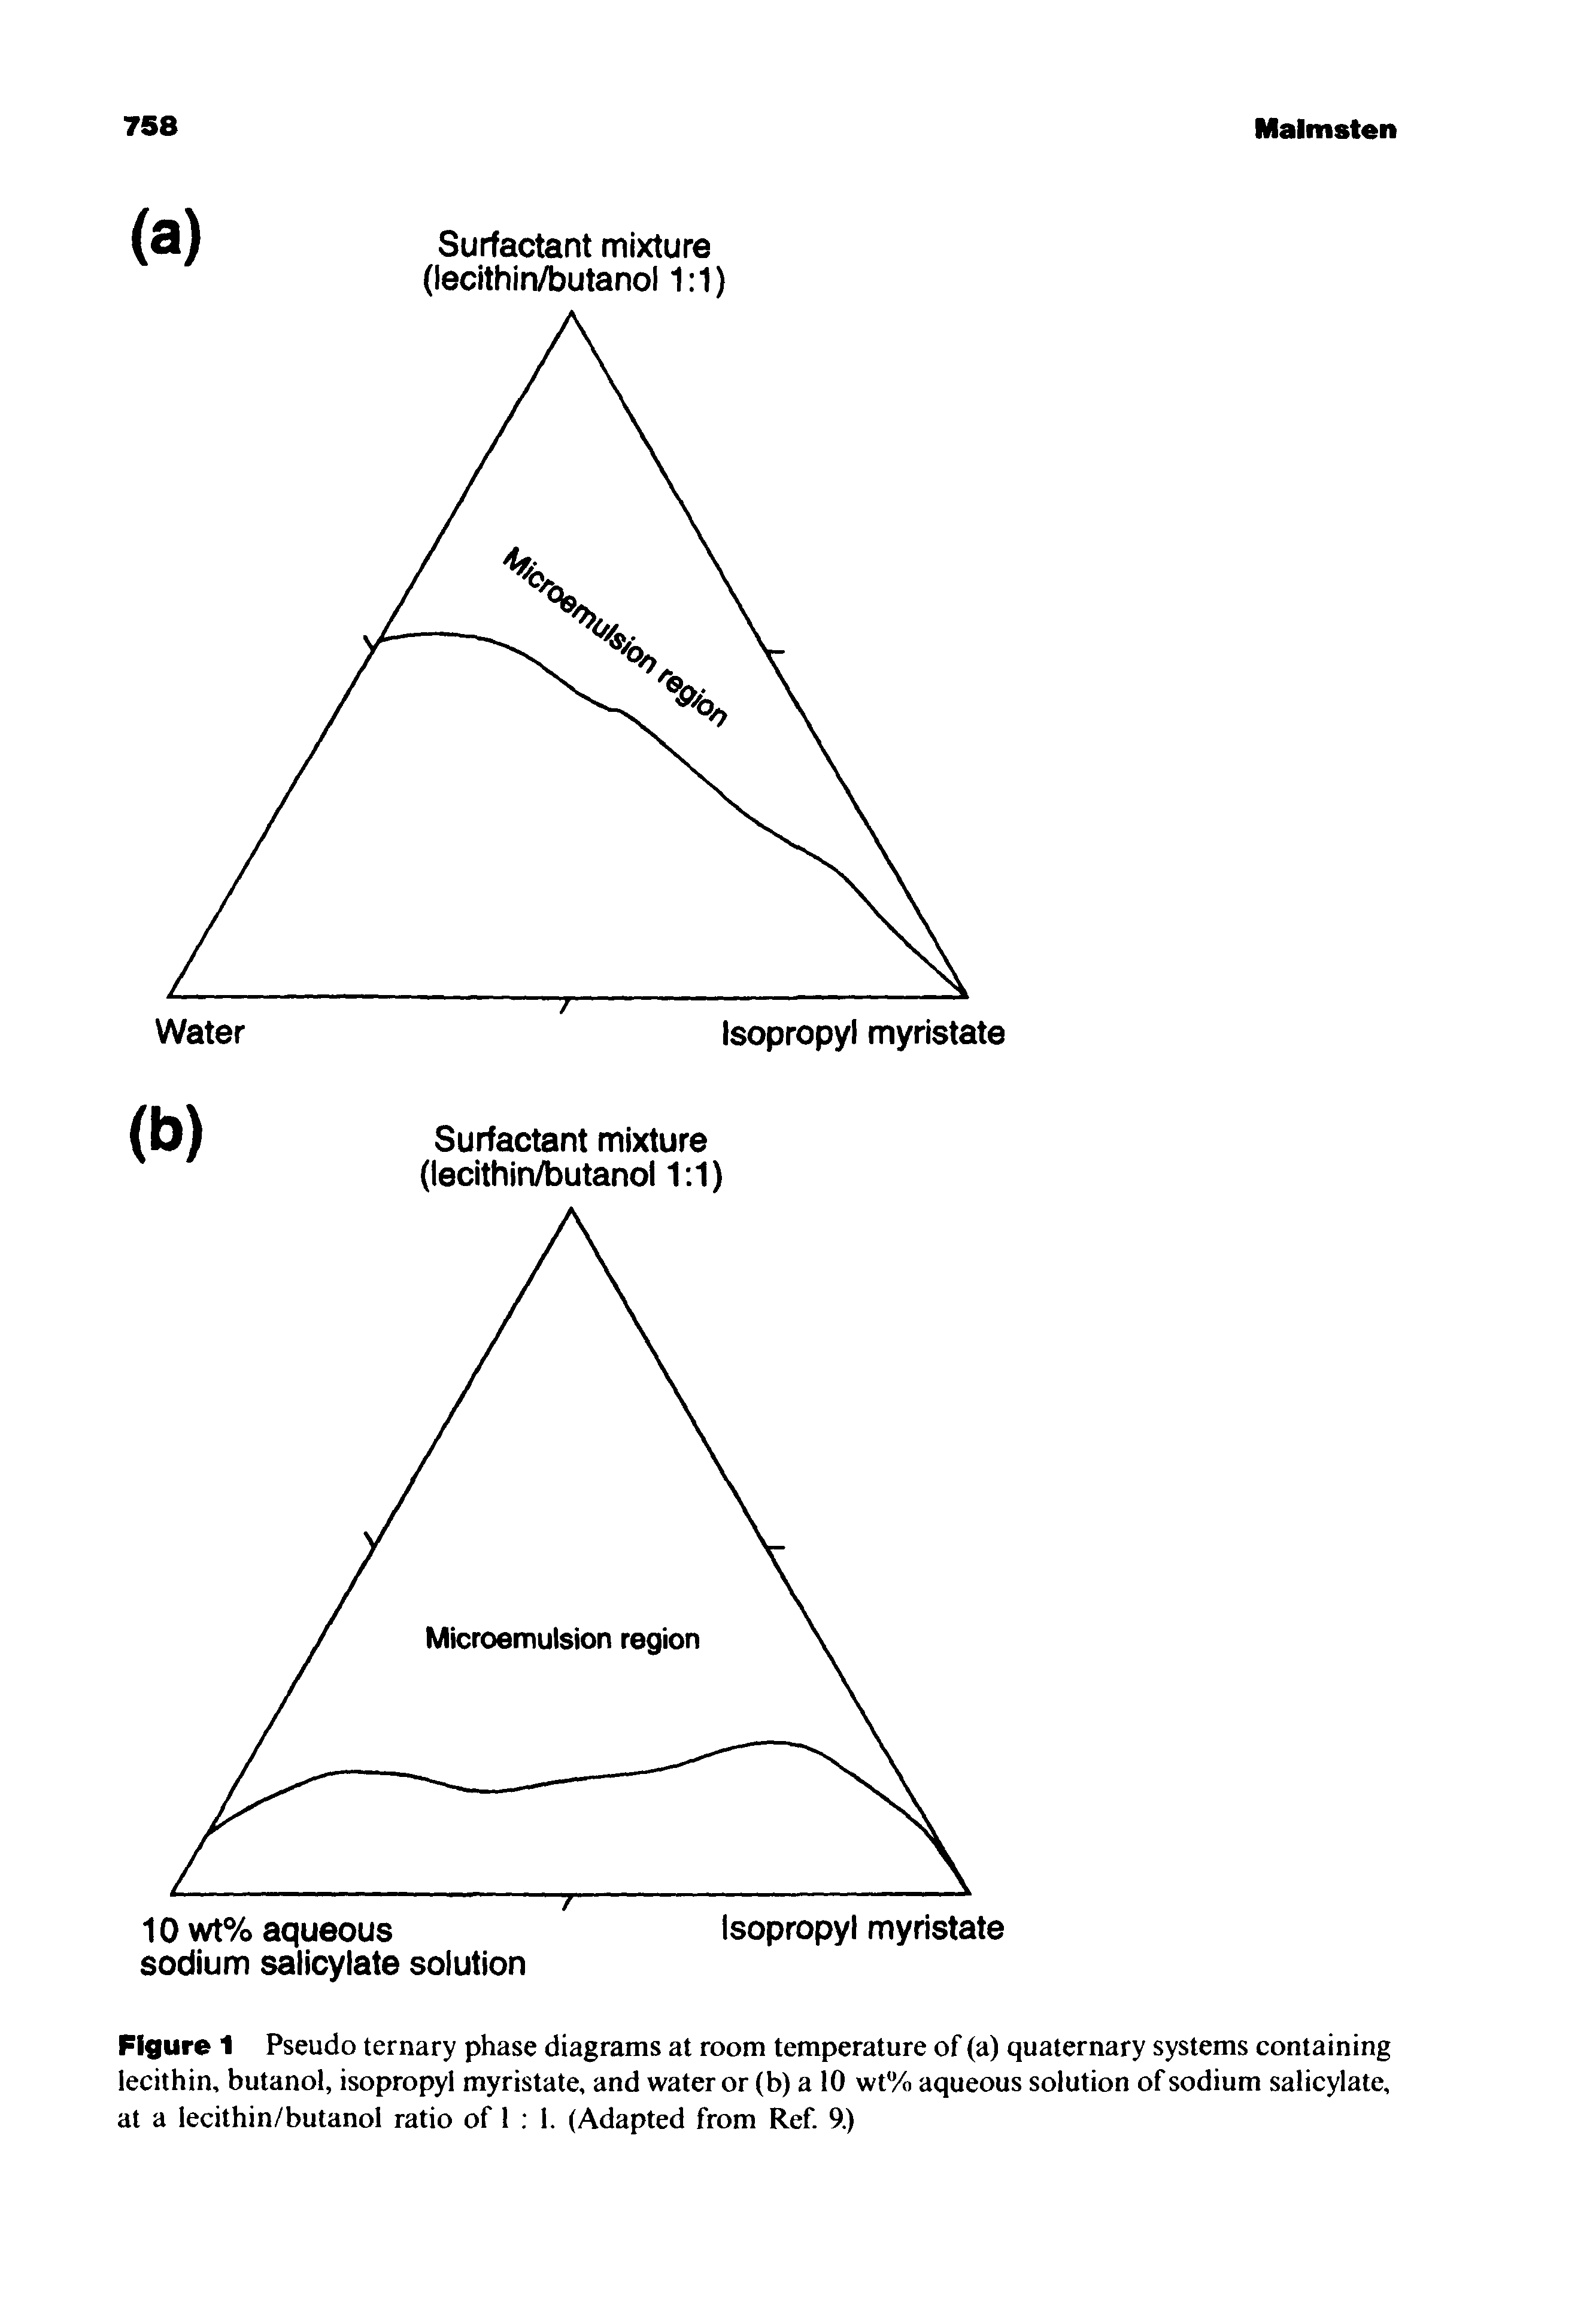 Figure 1 Pseudo ternary phase diagrams at room temperature of (a) quaternary systems containing lecithin, butanol, isopropyl myristate, and water or (b) a 10 wt% aqueous solution of sodium salicylate, at a lecithin/butanol ratio of 1 1. (Adapted from Ref. 9.)...